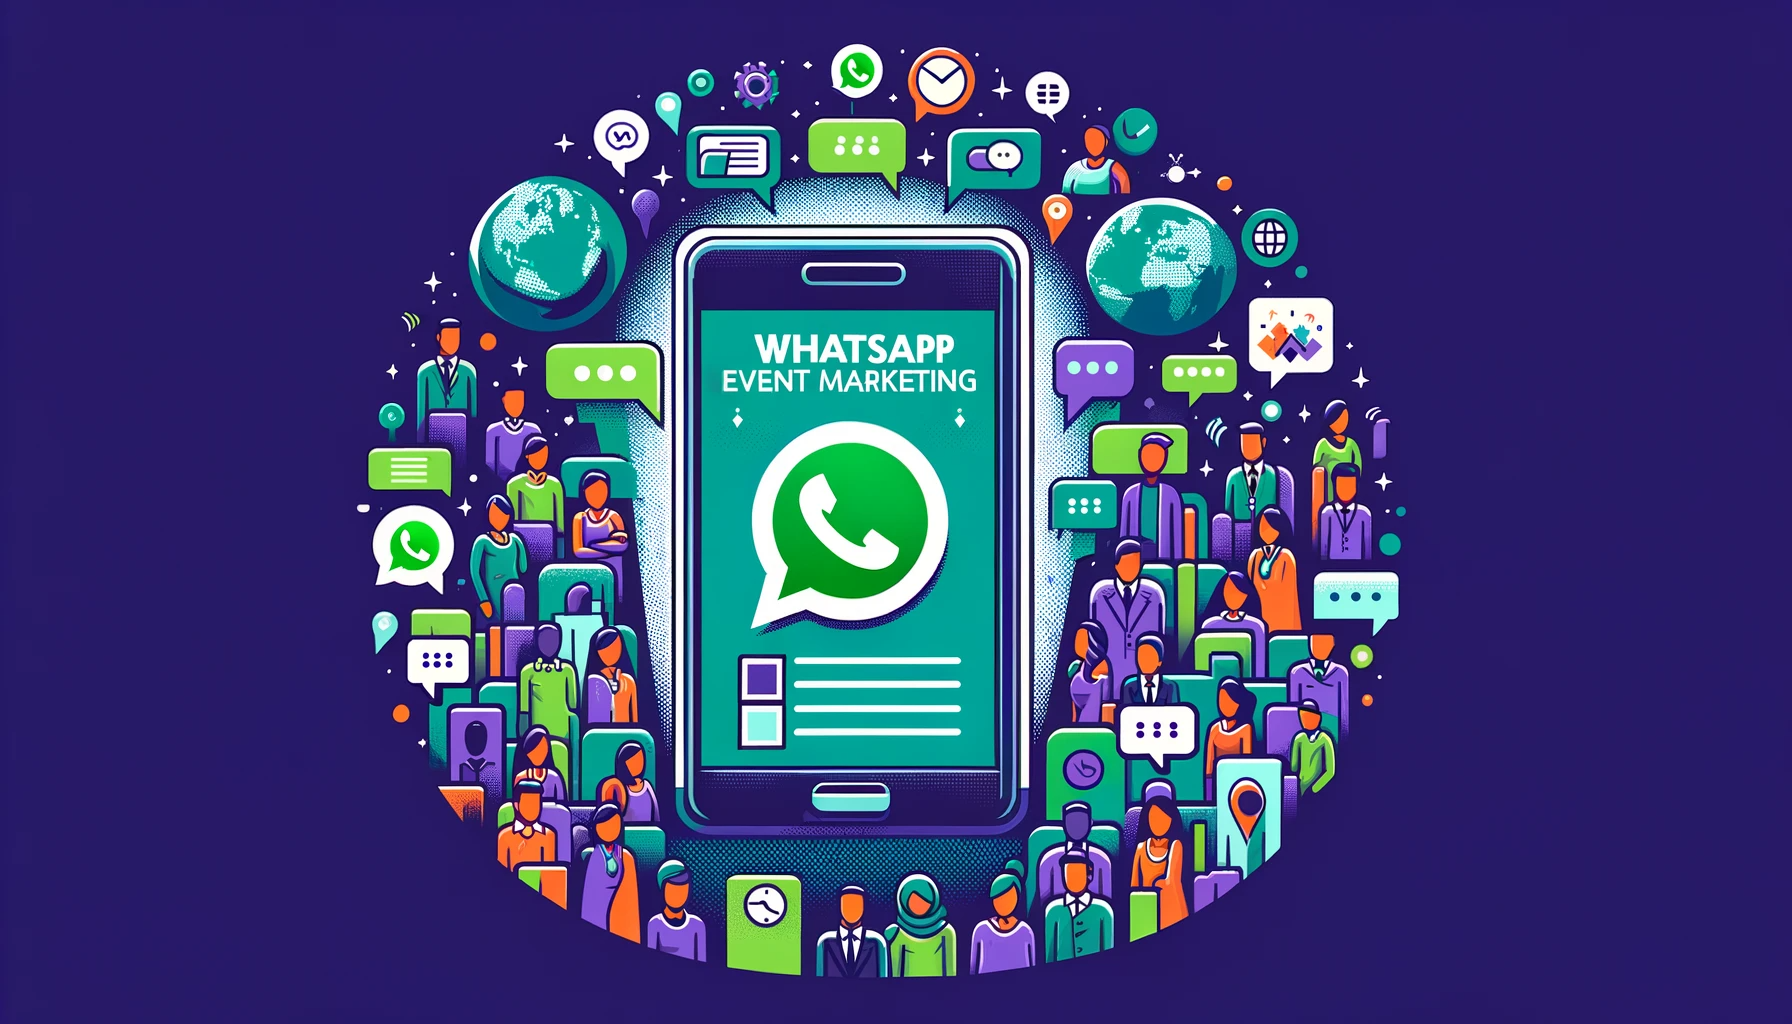 WhatsApp Event Marketing: A Guide to Reaching Your Audience